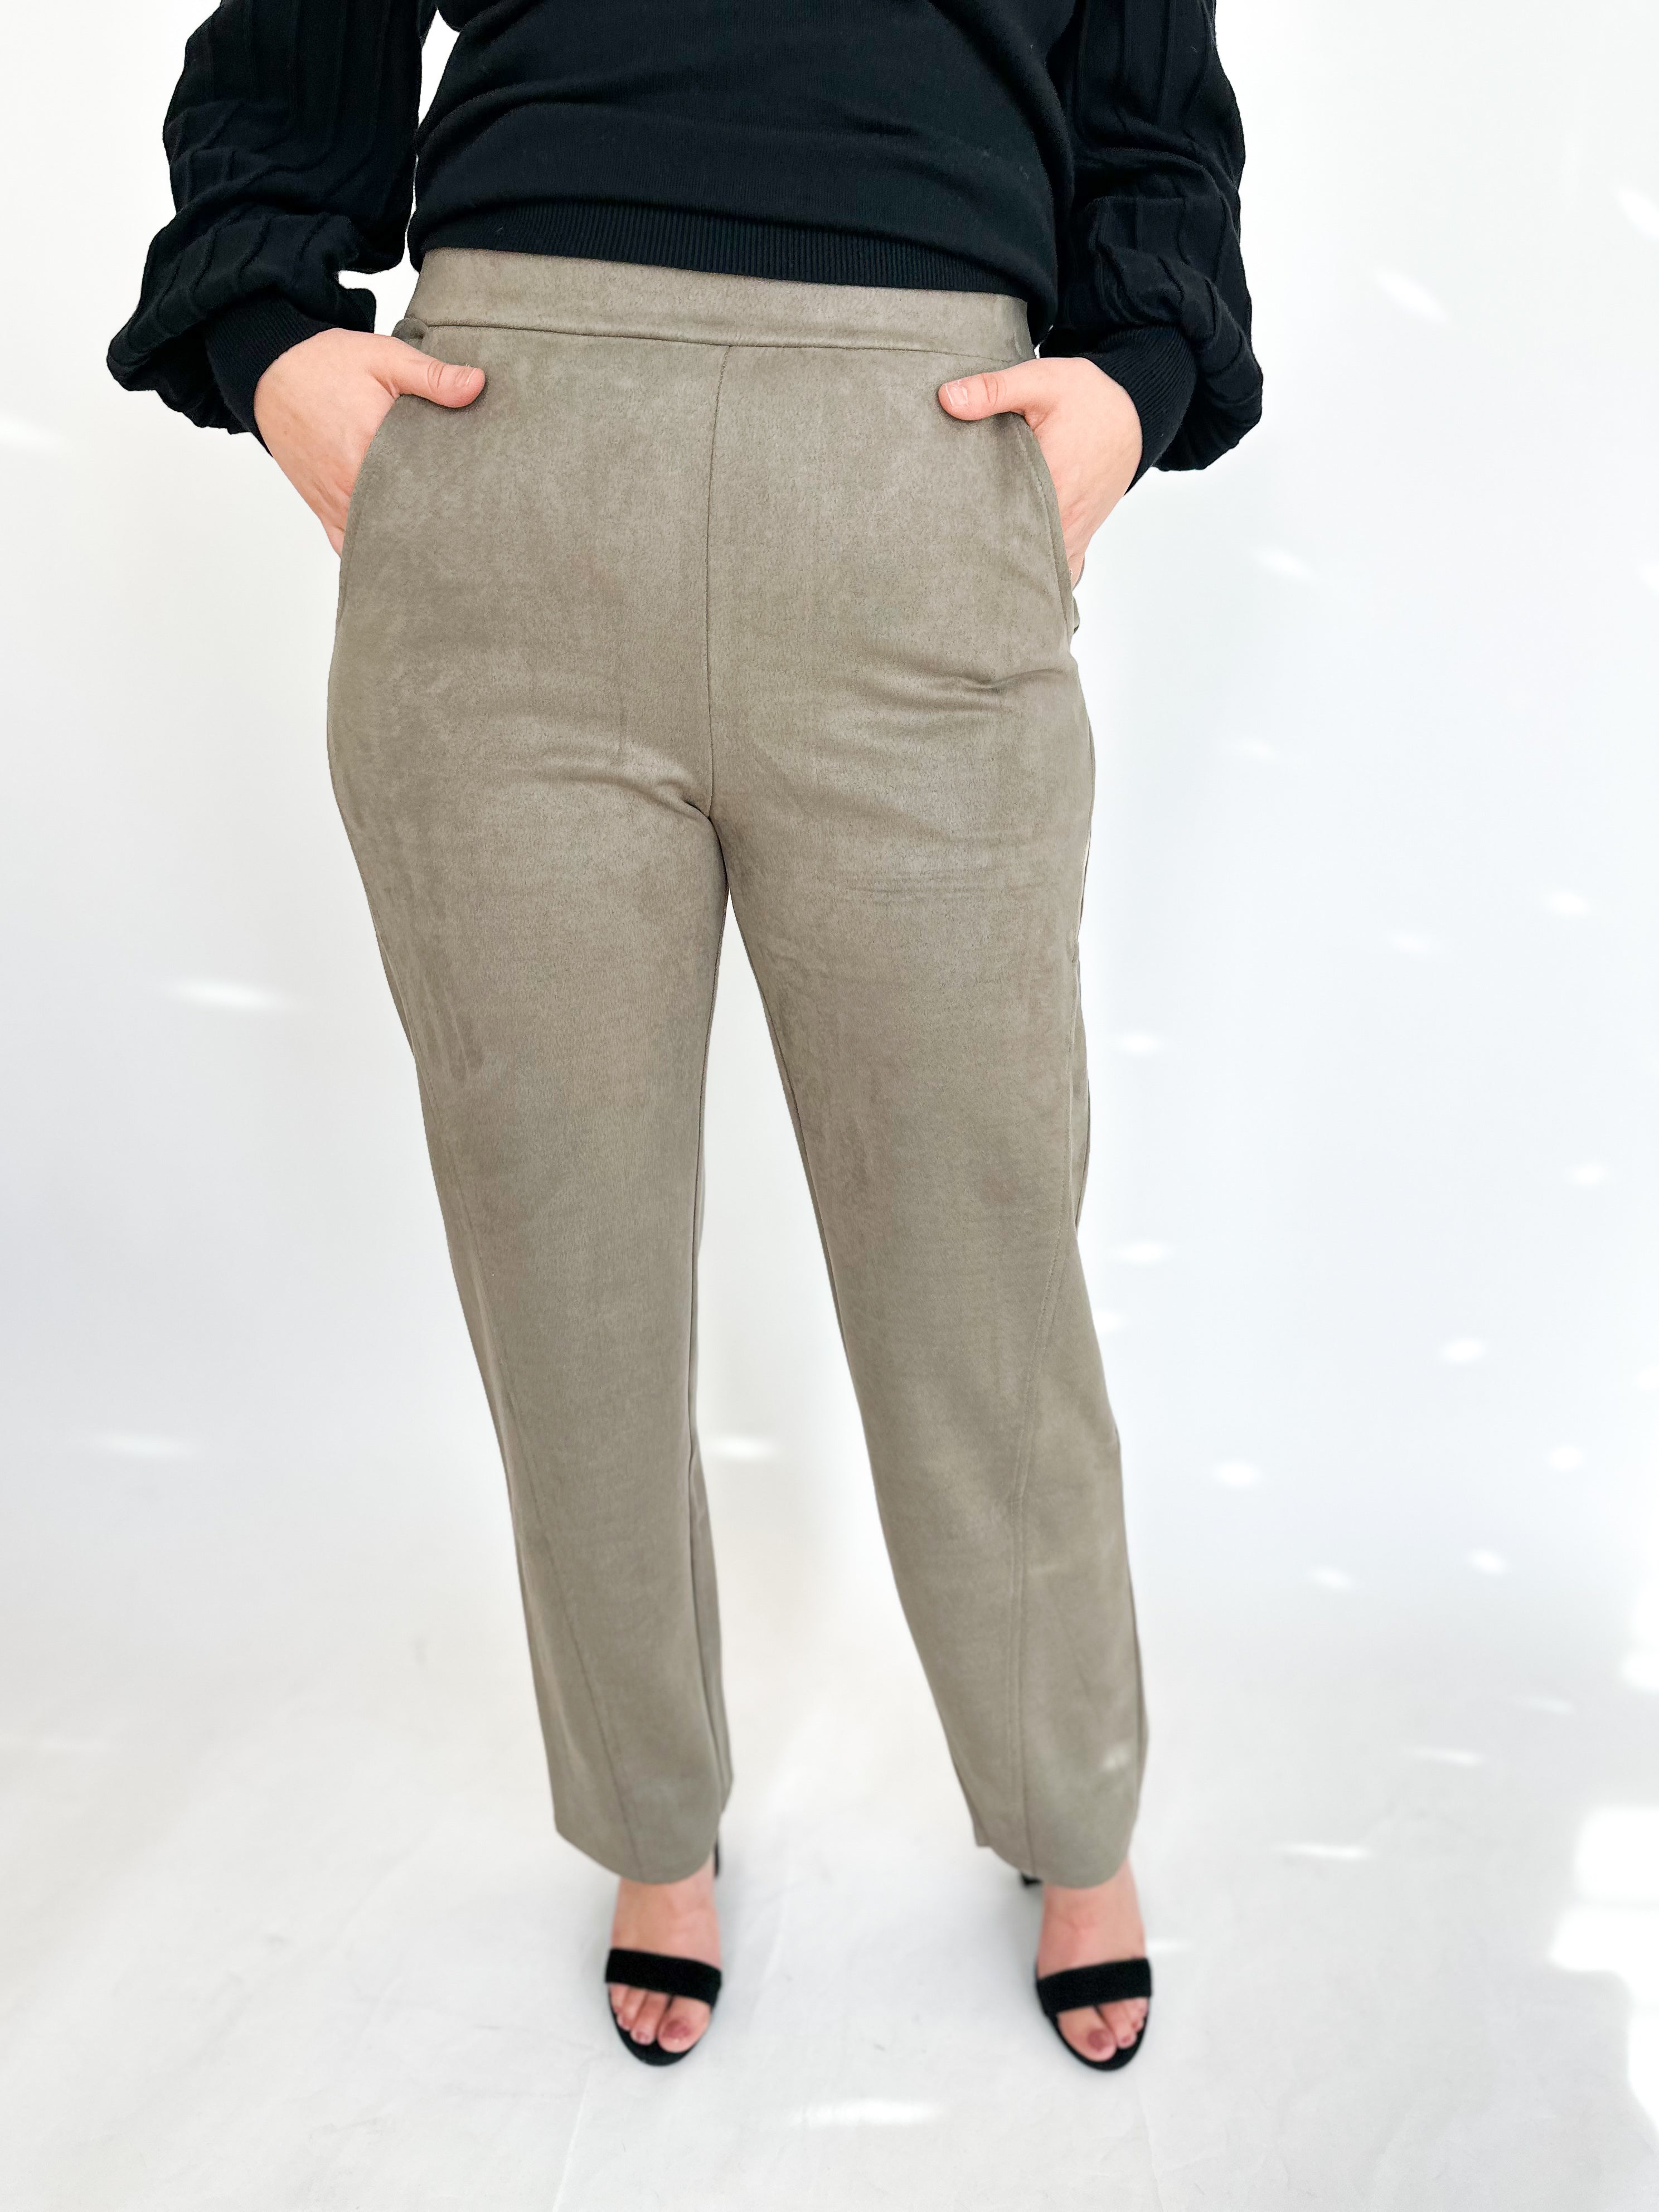 Chic Trousers - Mocha-400 Pants-ALLIE ROSE-July & June Women's Fashion Boutique Located in San Antonio, Texas